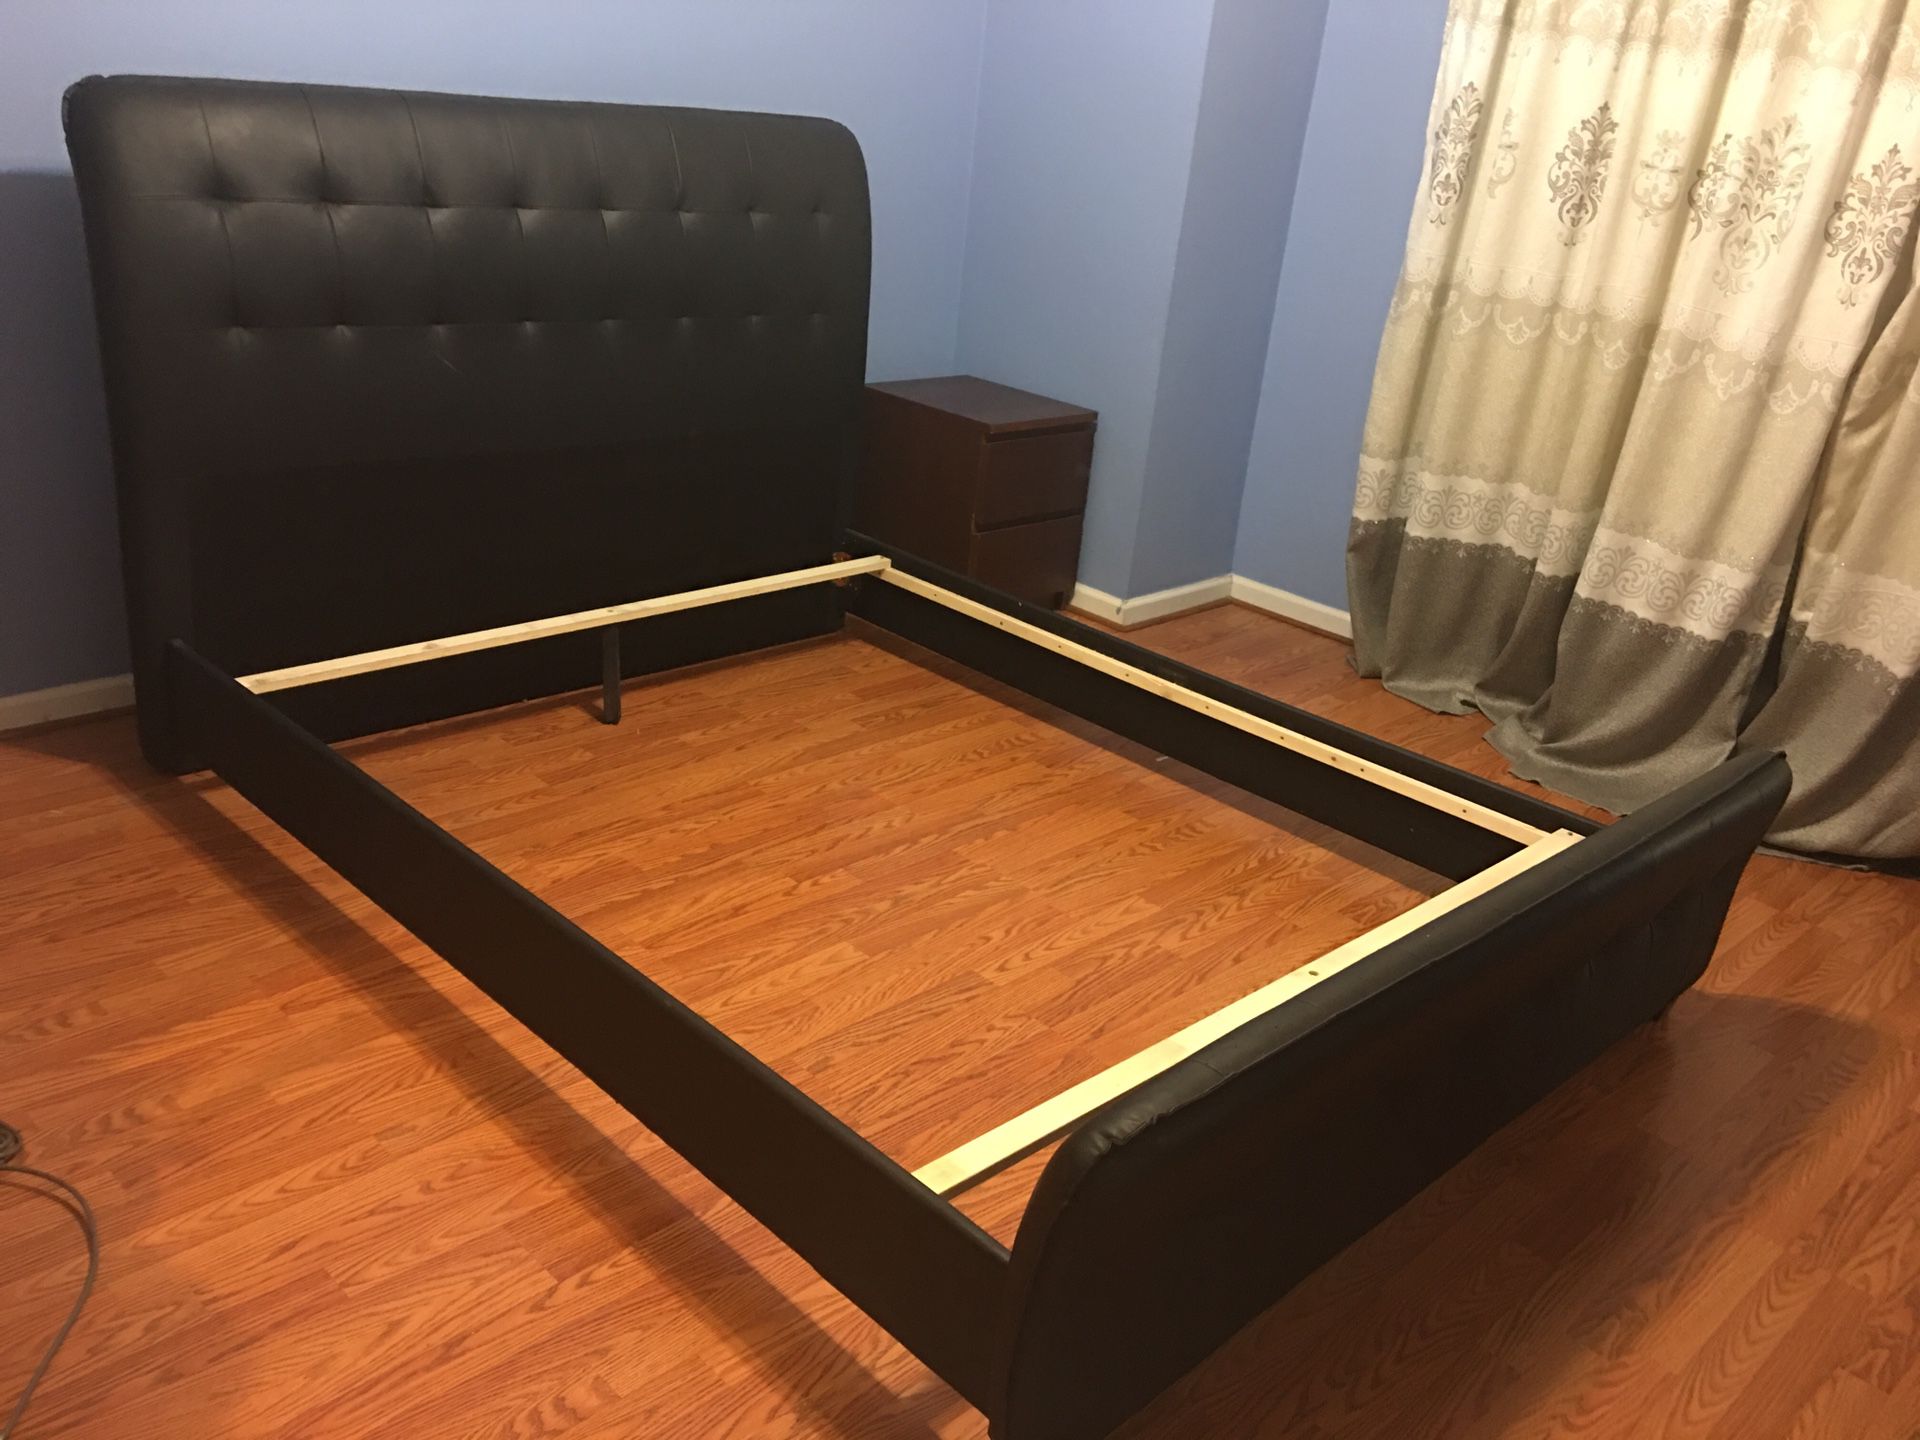 Black leather queen bed frame ONLY